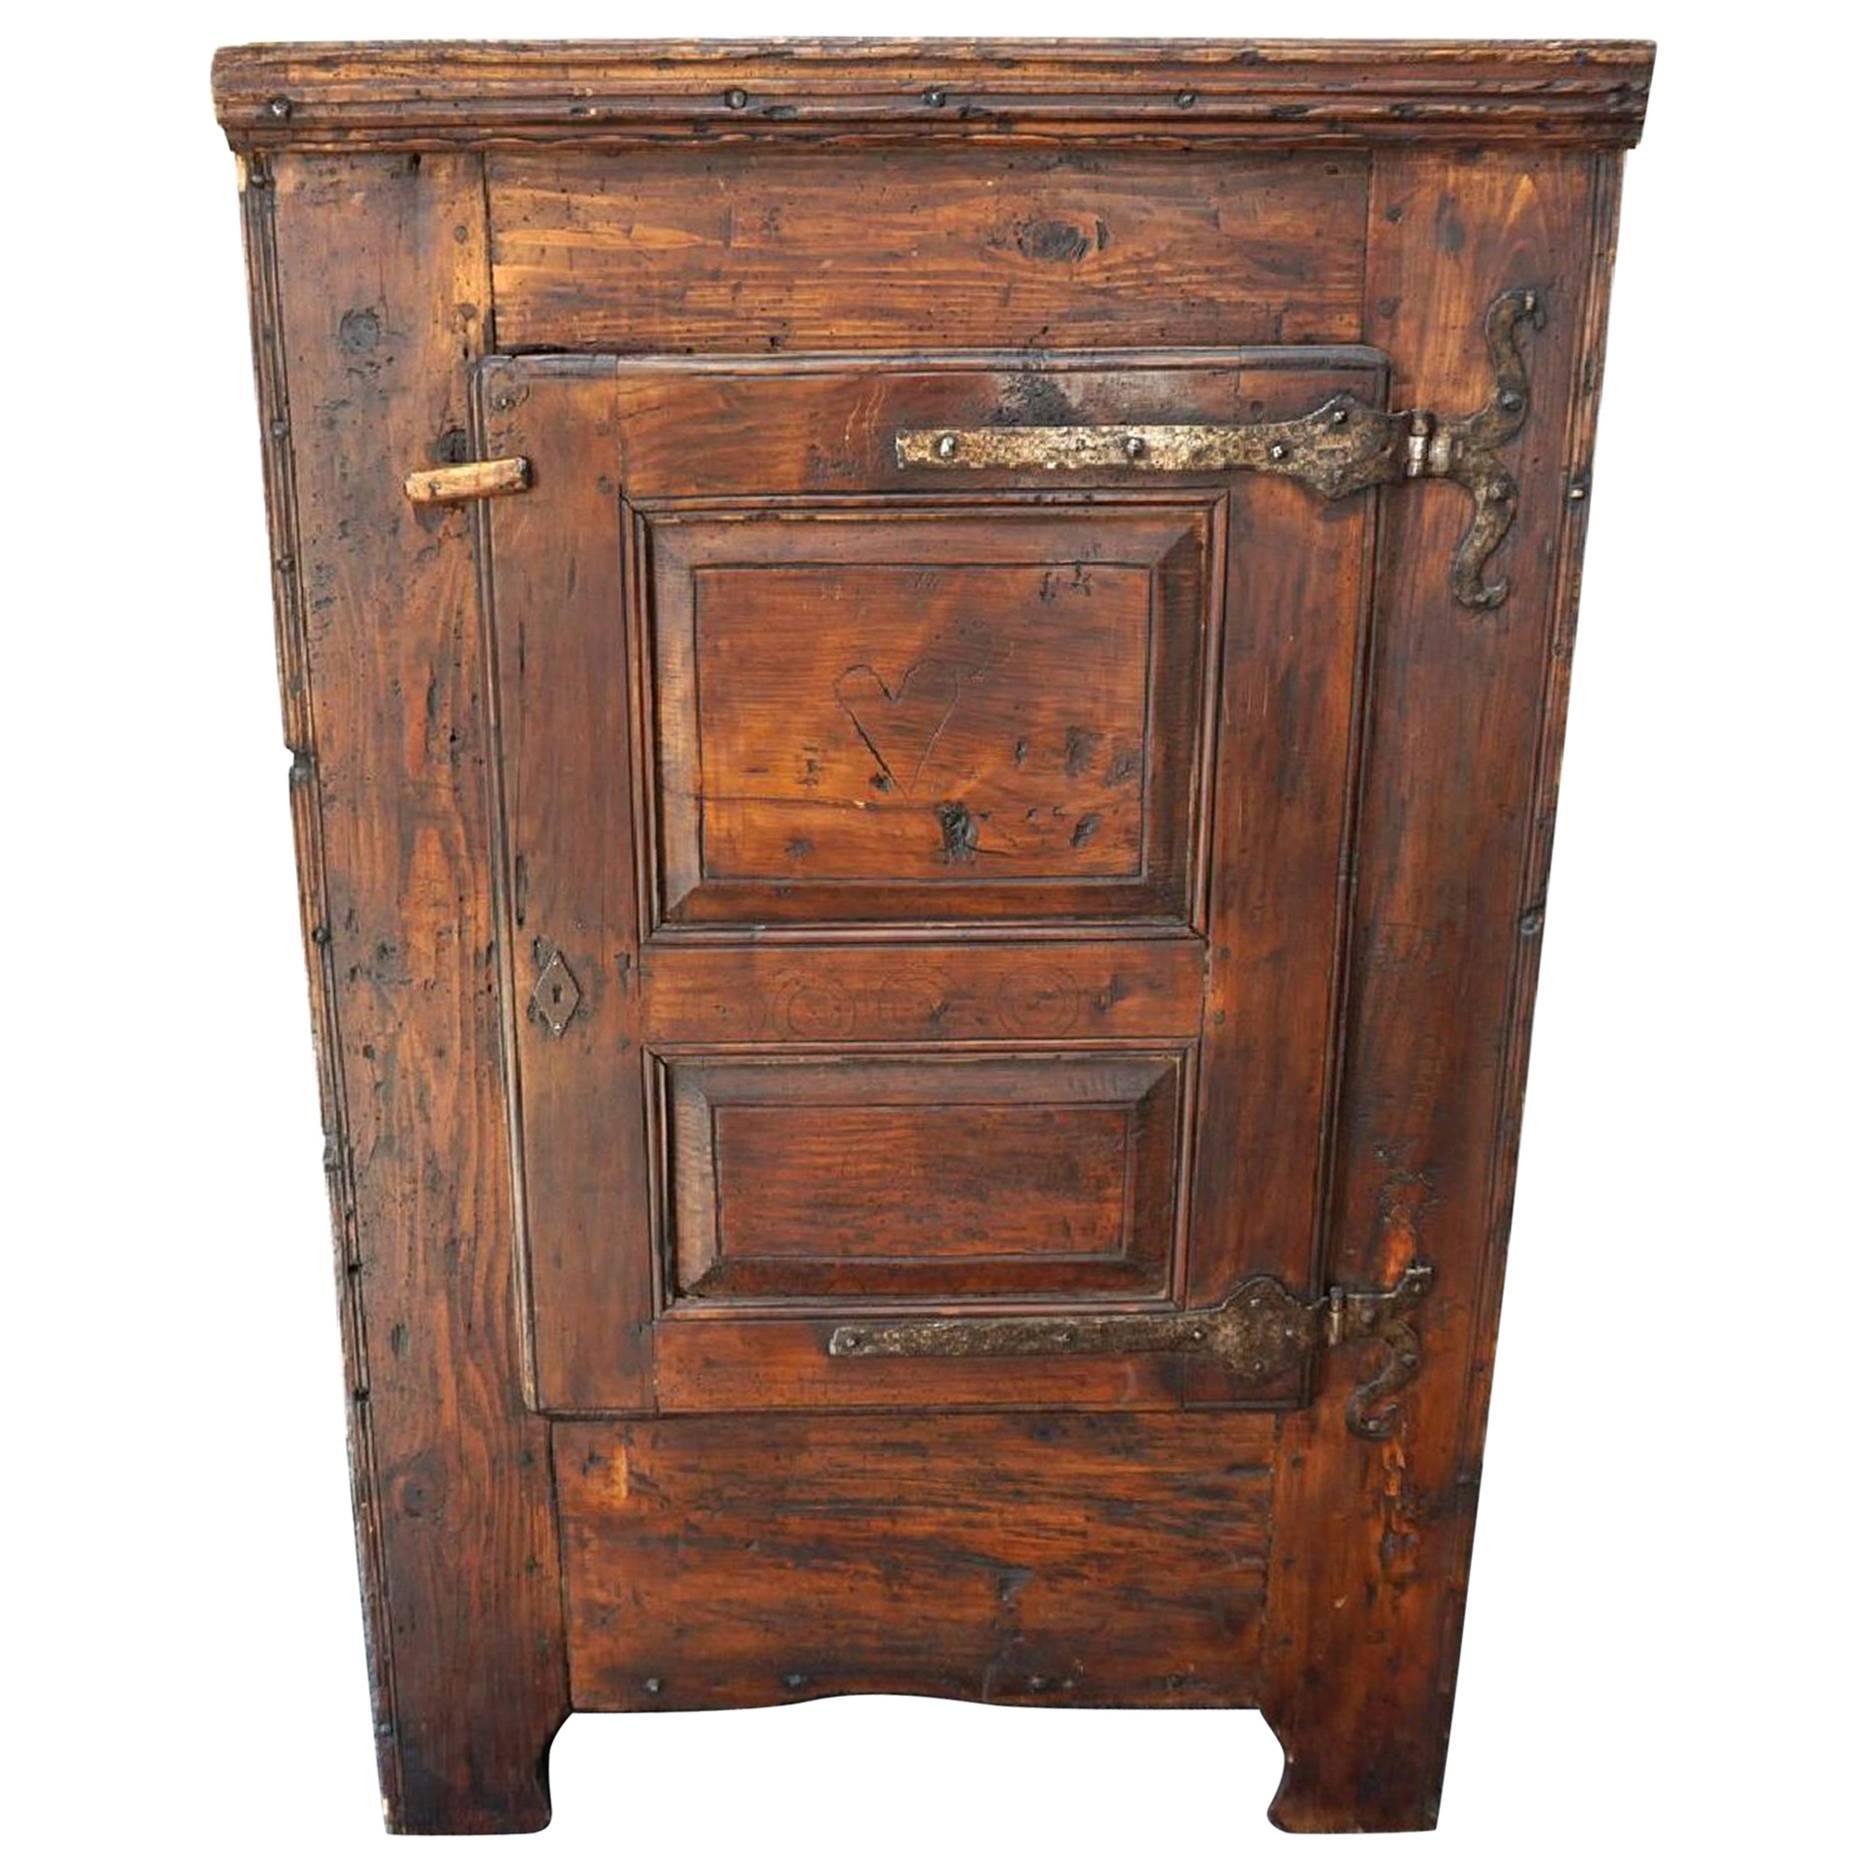 Charming Small 18th Century French Provincial Rustic Cupboard